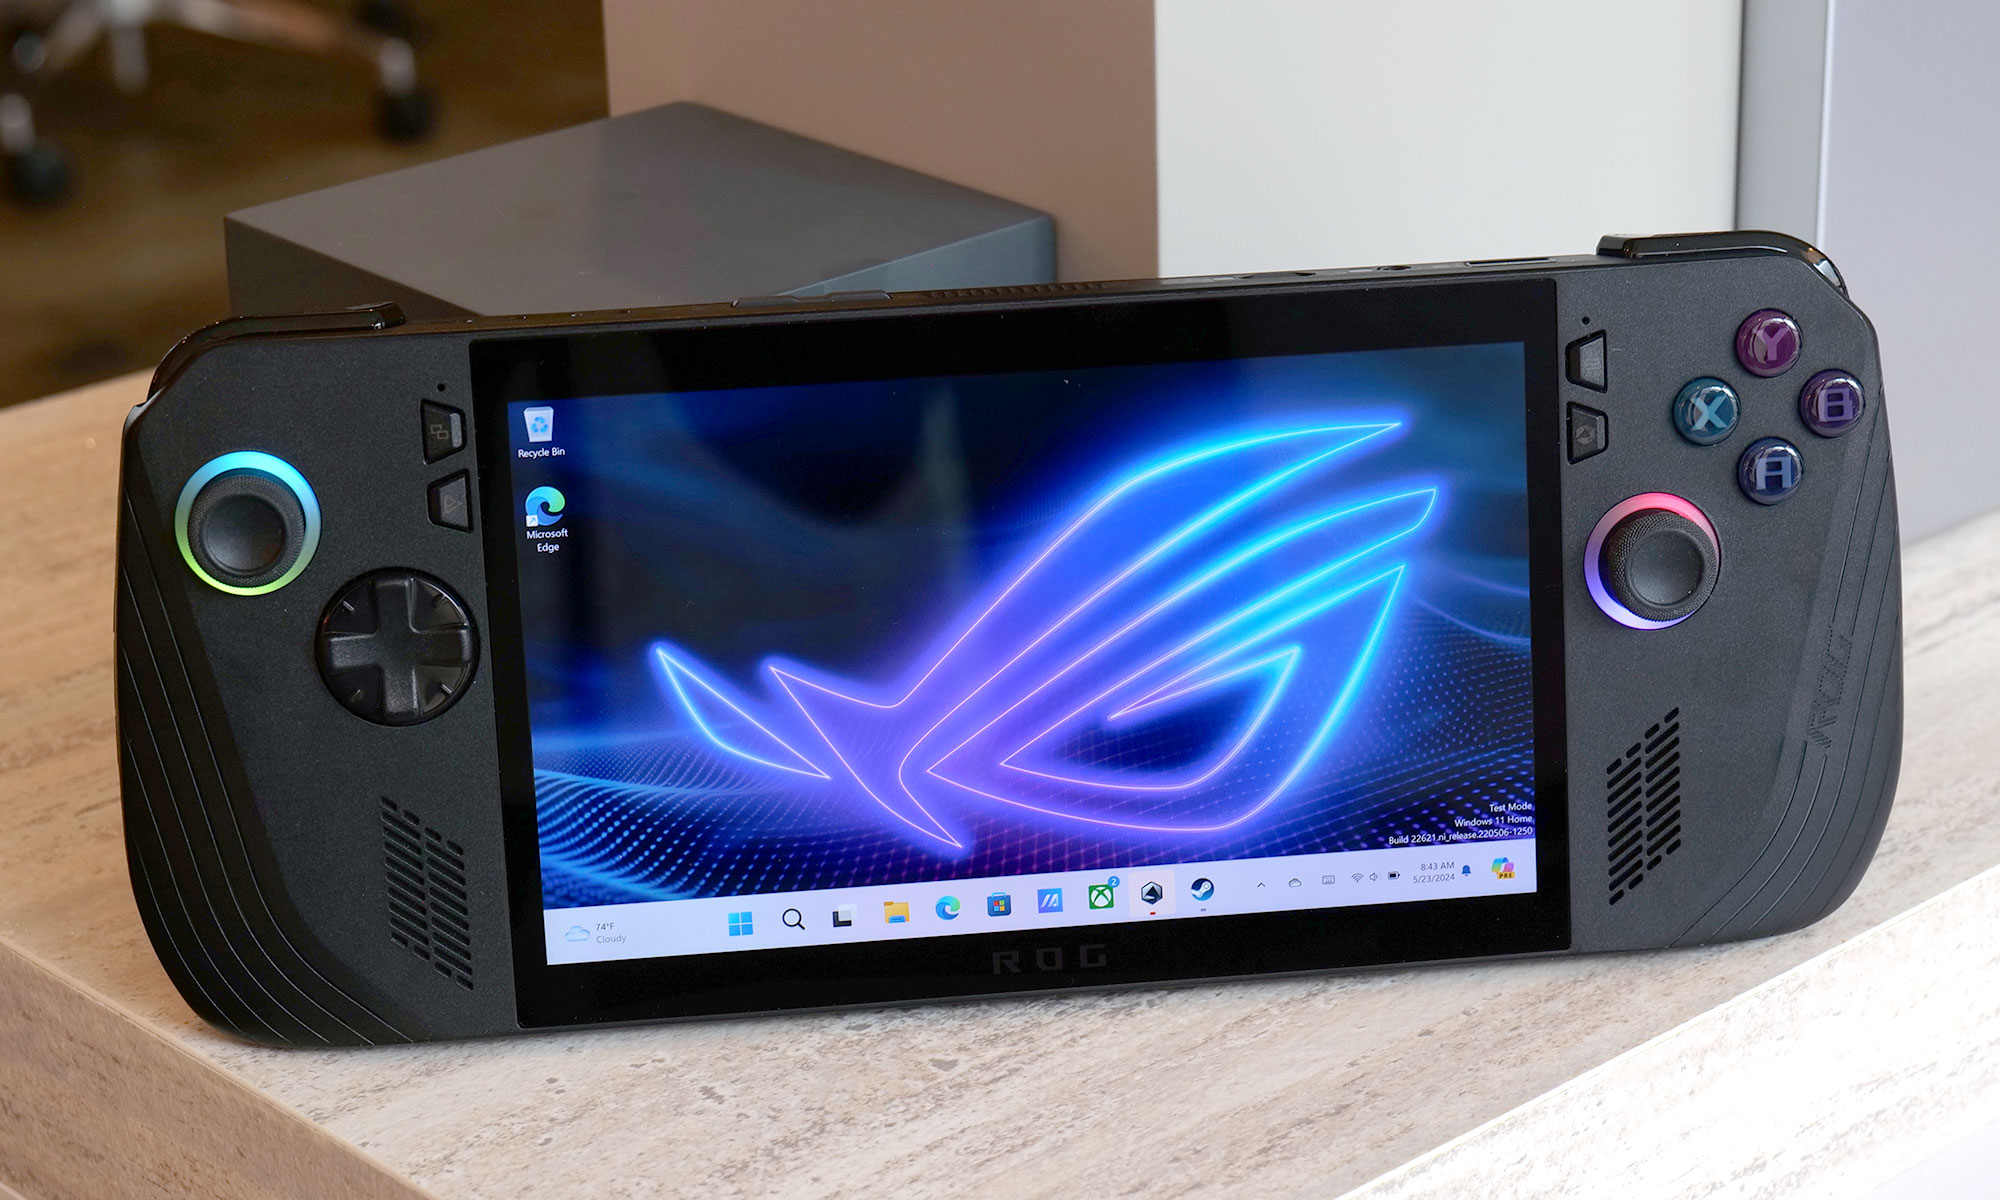 The ASUS ROG Ally X gaming handheld leaning against some cubic ornaments, with the Windows home page on its screen.